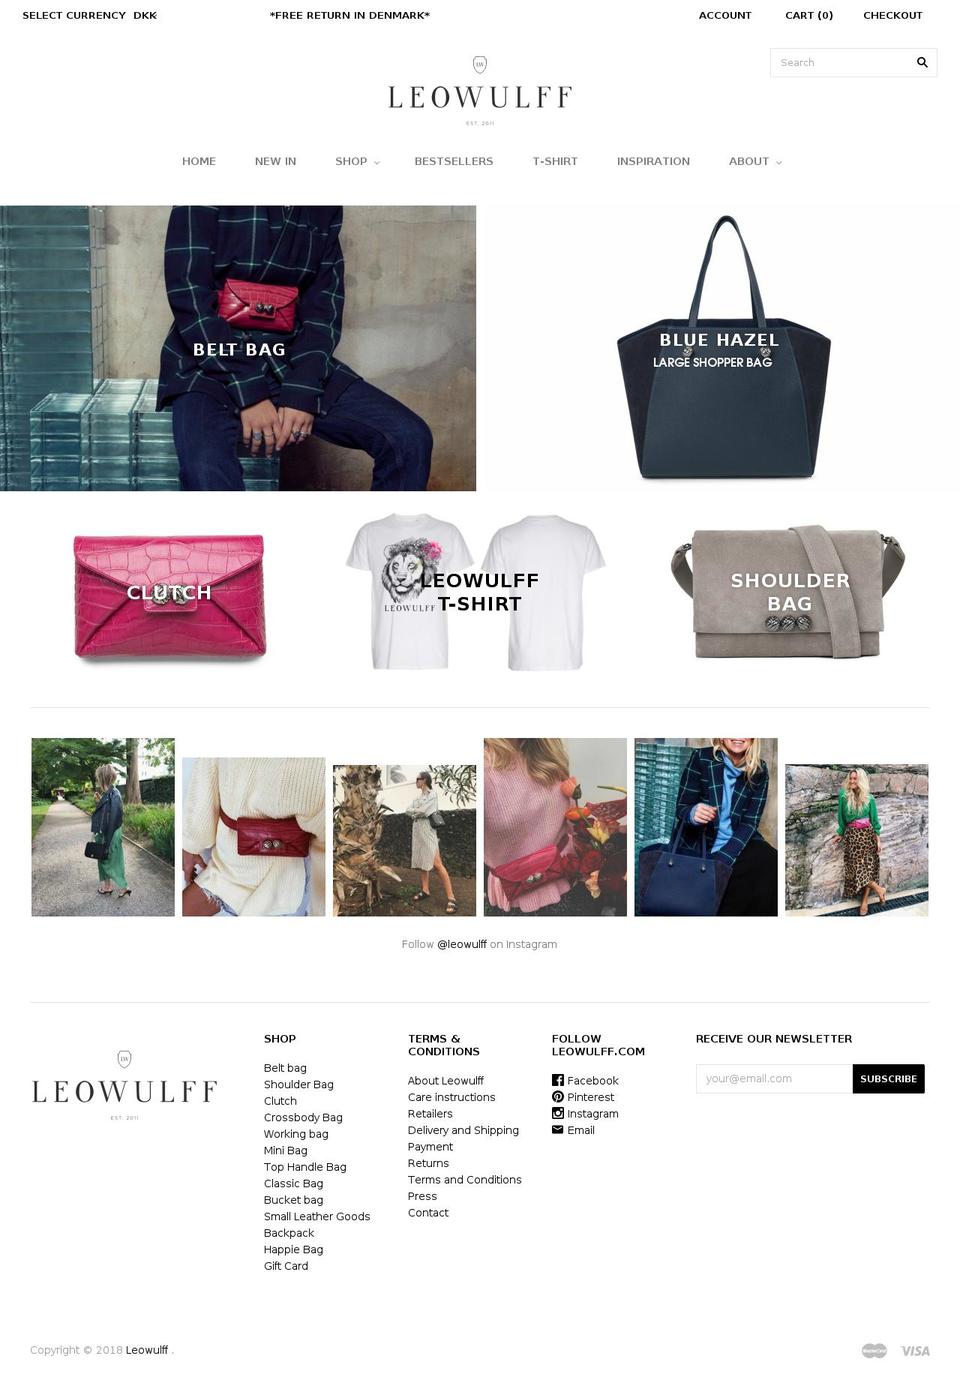 Copy of Leowulff by Satisphy - HC - 18 Aug Shopify theme site example lewulff.com